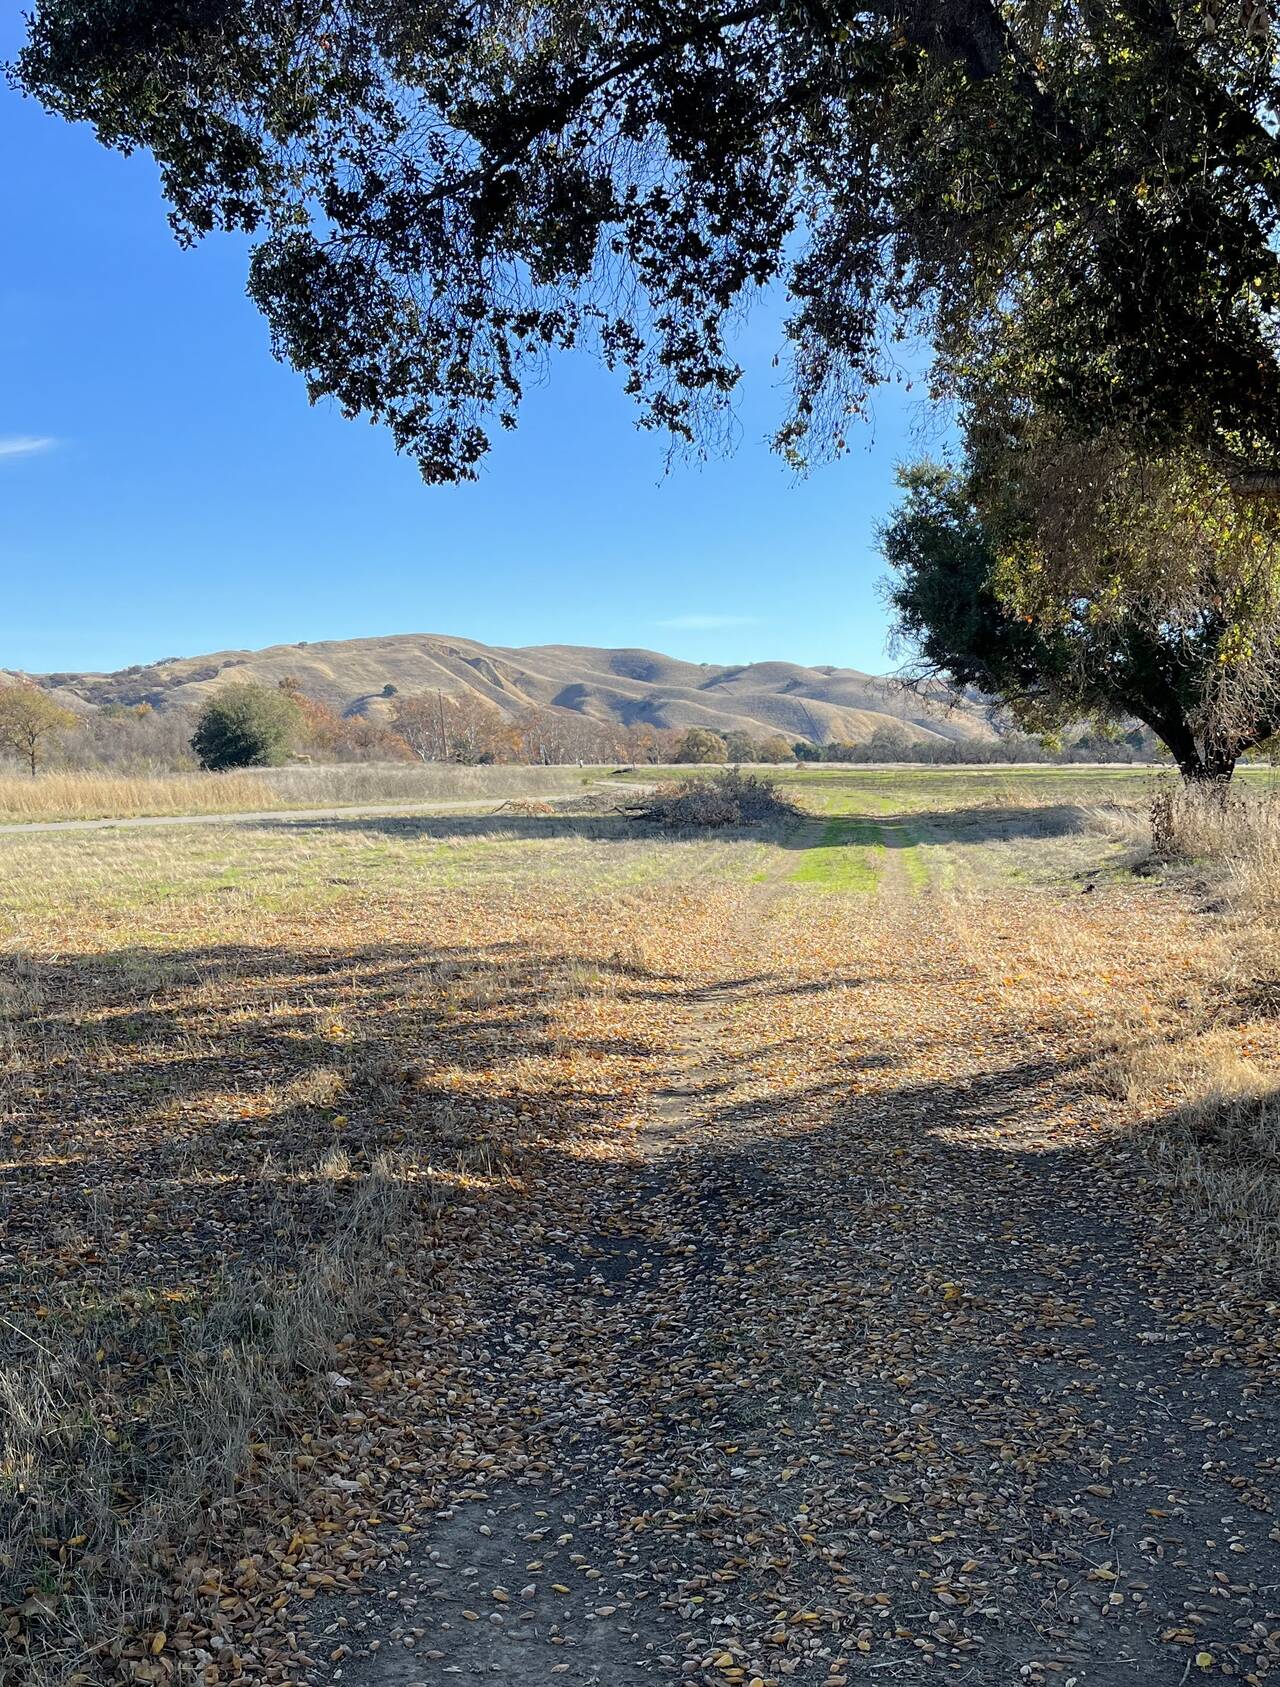 Trees and shade on the plains of Sycamore Grove Park